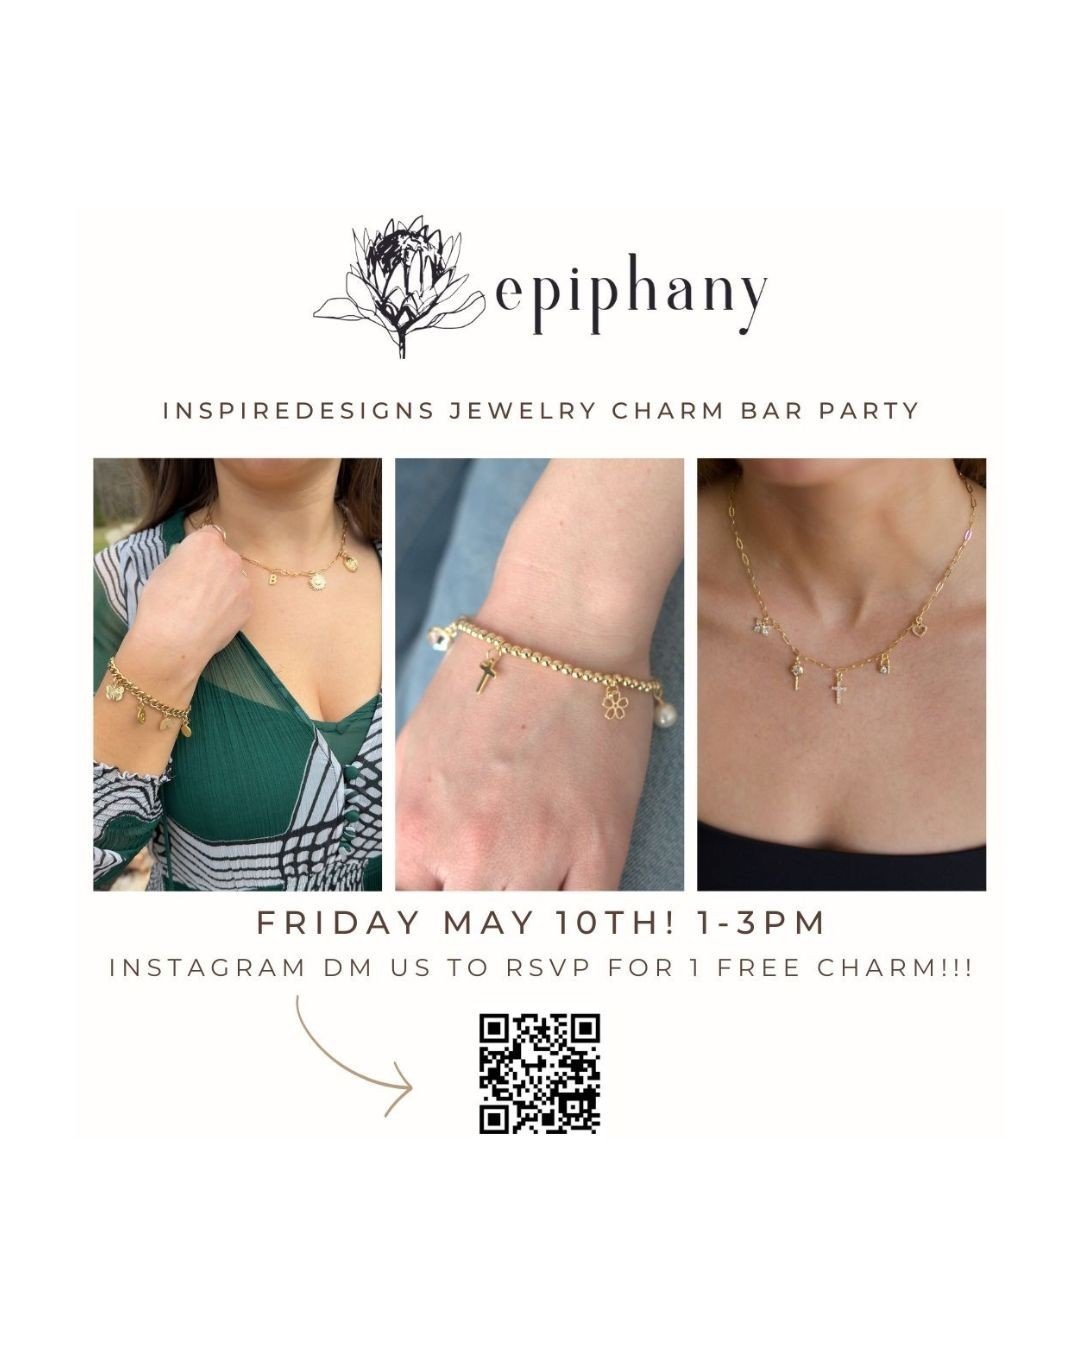 We are so excited to announce our charm bar event with @inspiredesigns on Friday, May 10th from 1-3pm in our Athens location! Send us a DM to RSVP and get a free charm ✨️